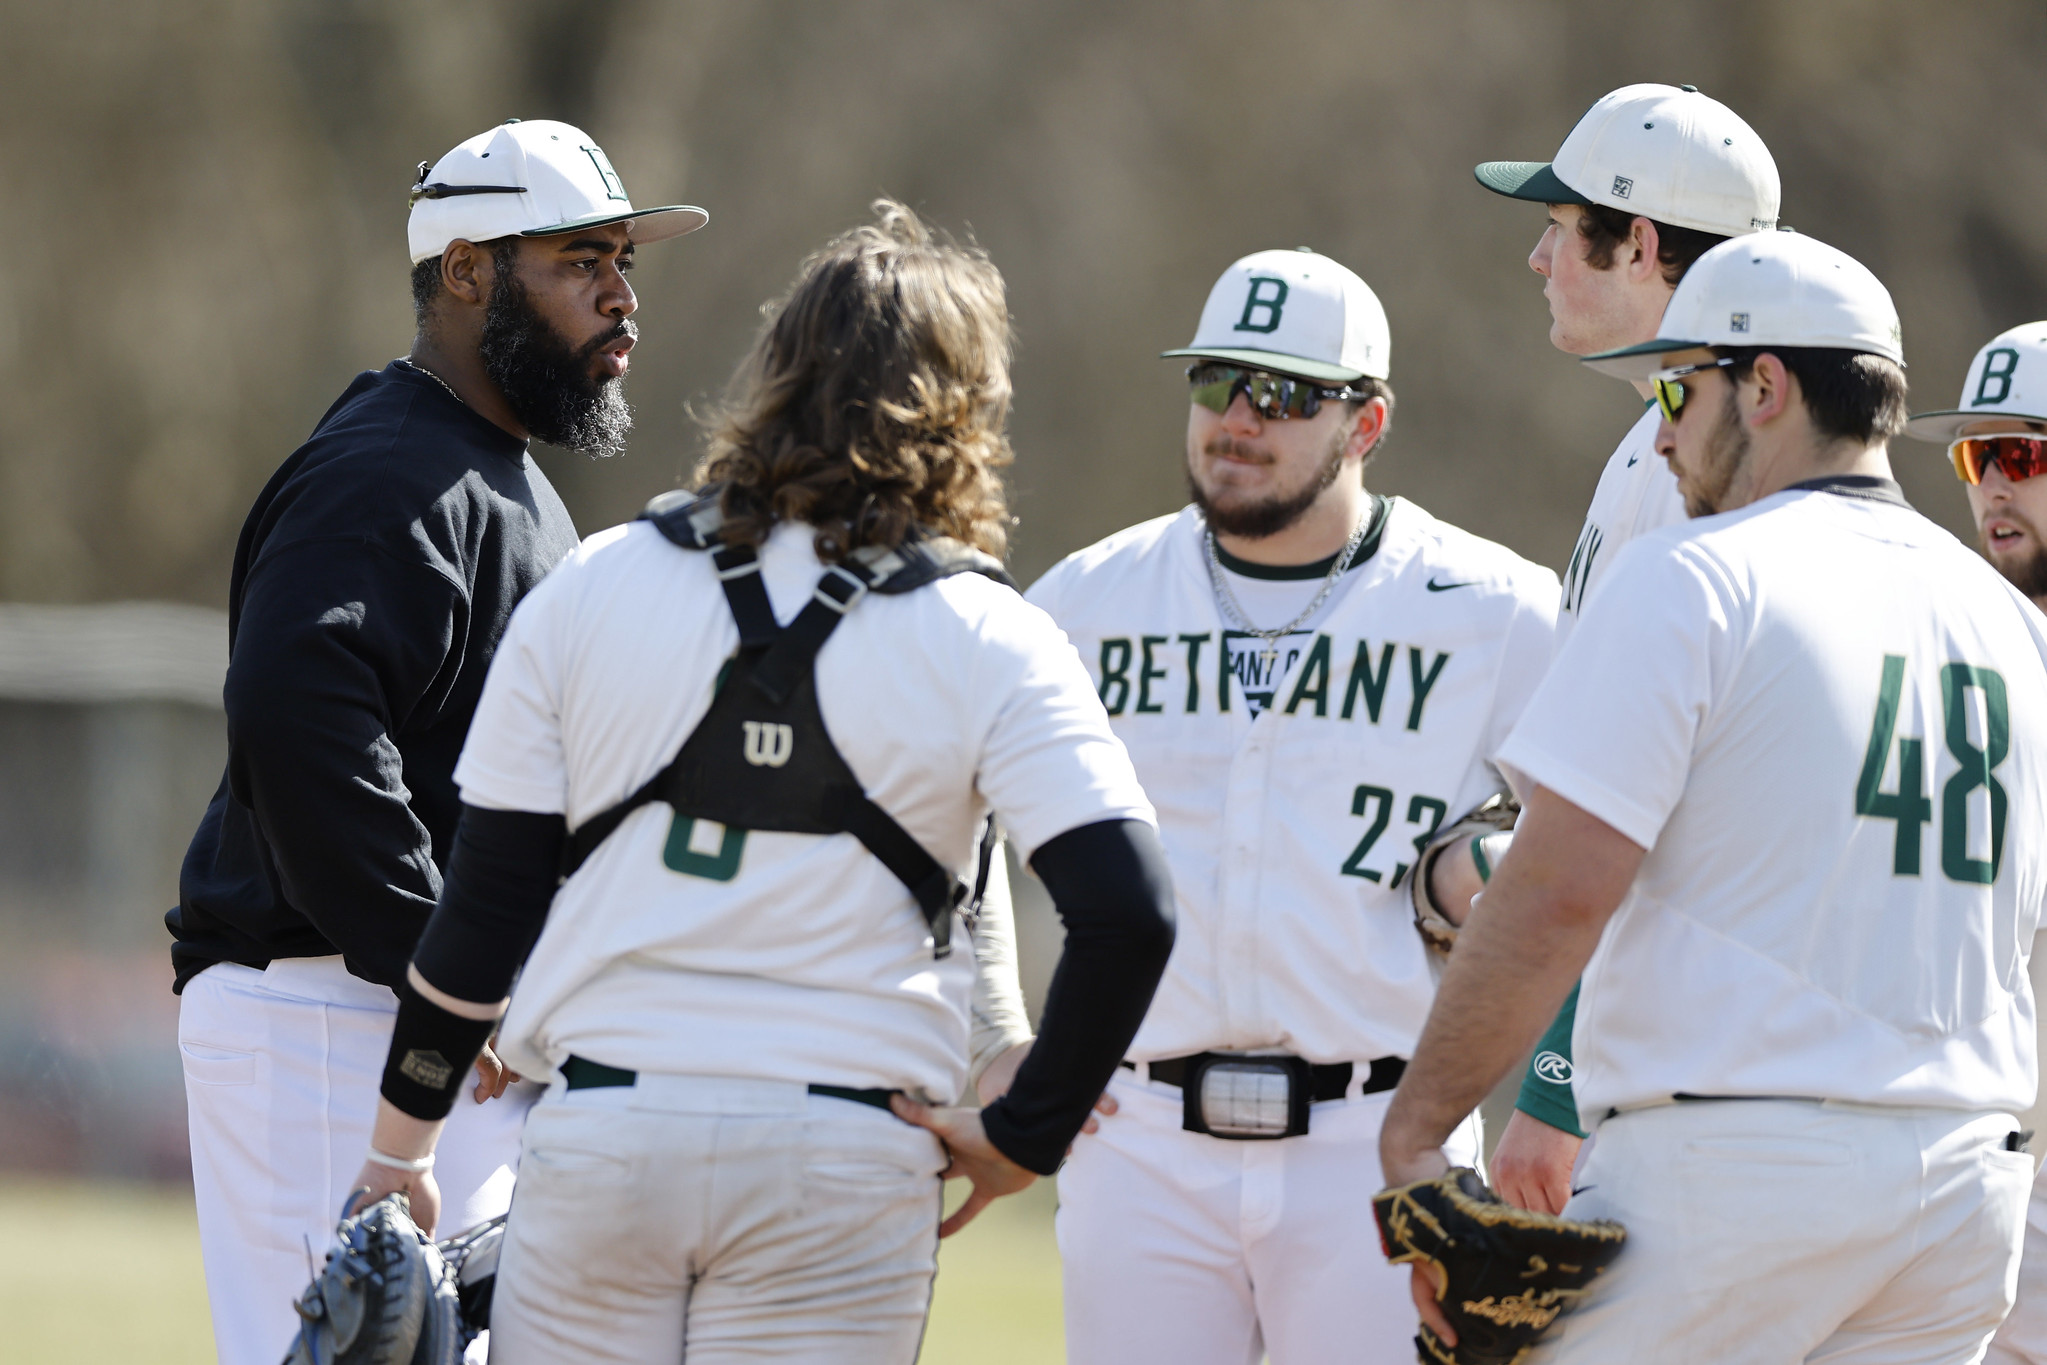 Baseball: Second-game struggles prevent Bison from winning series against Panthers